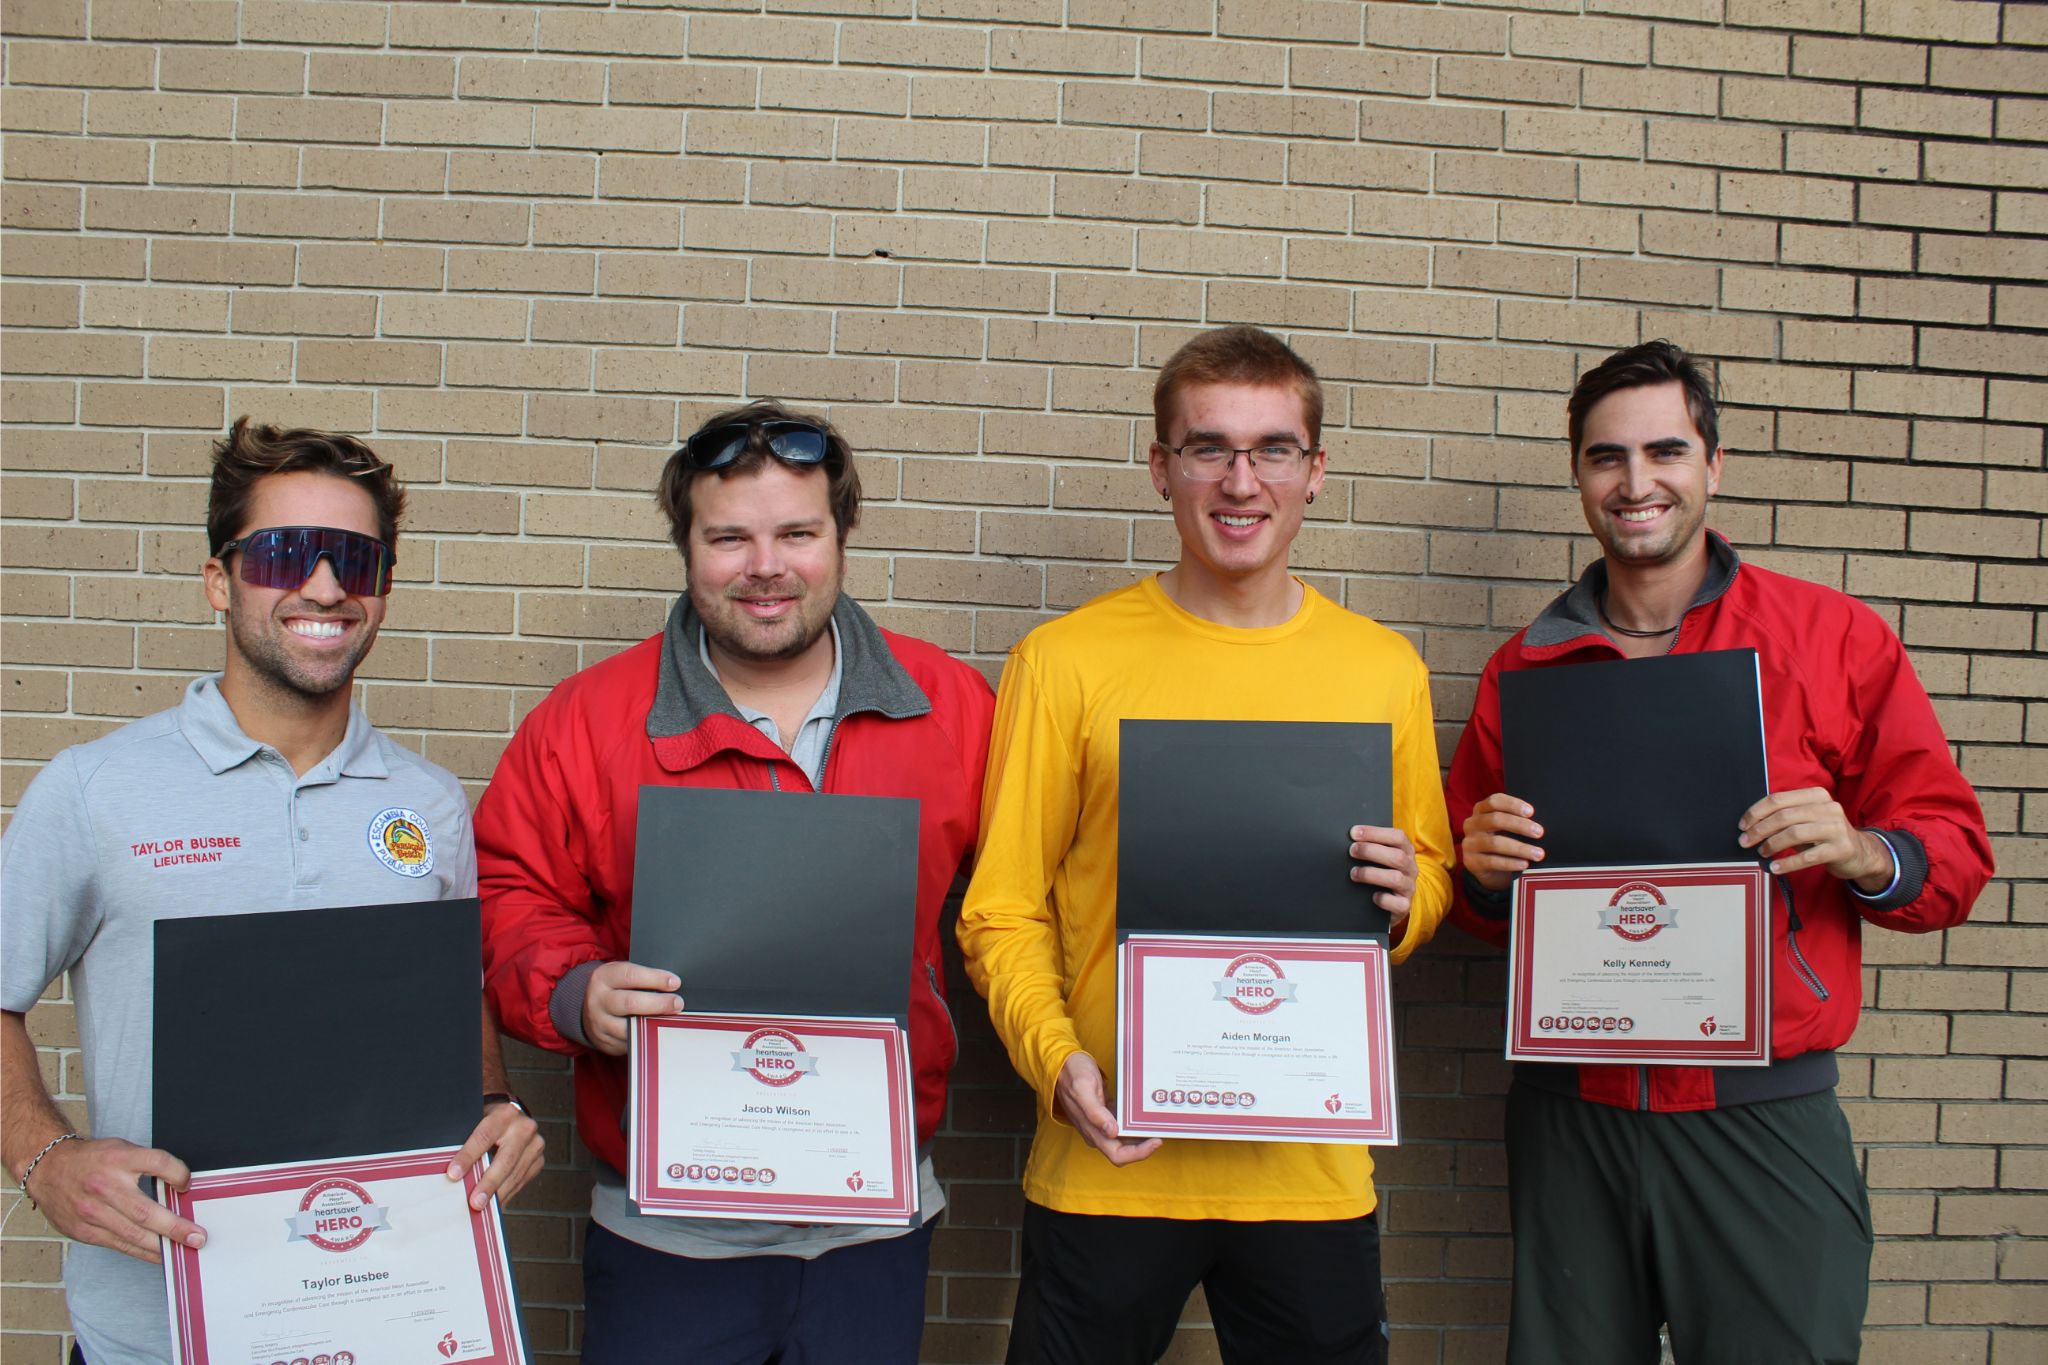 Lifeguards receiving recognition from the American Heart Association